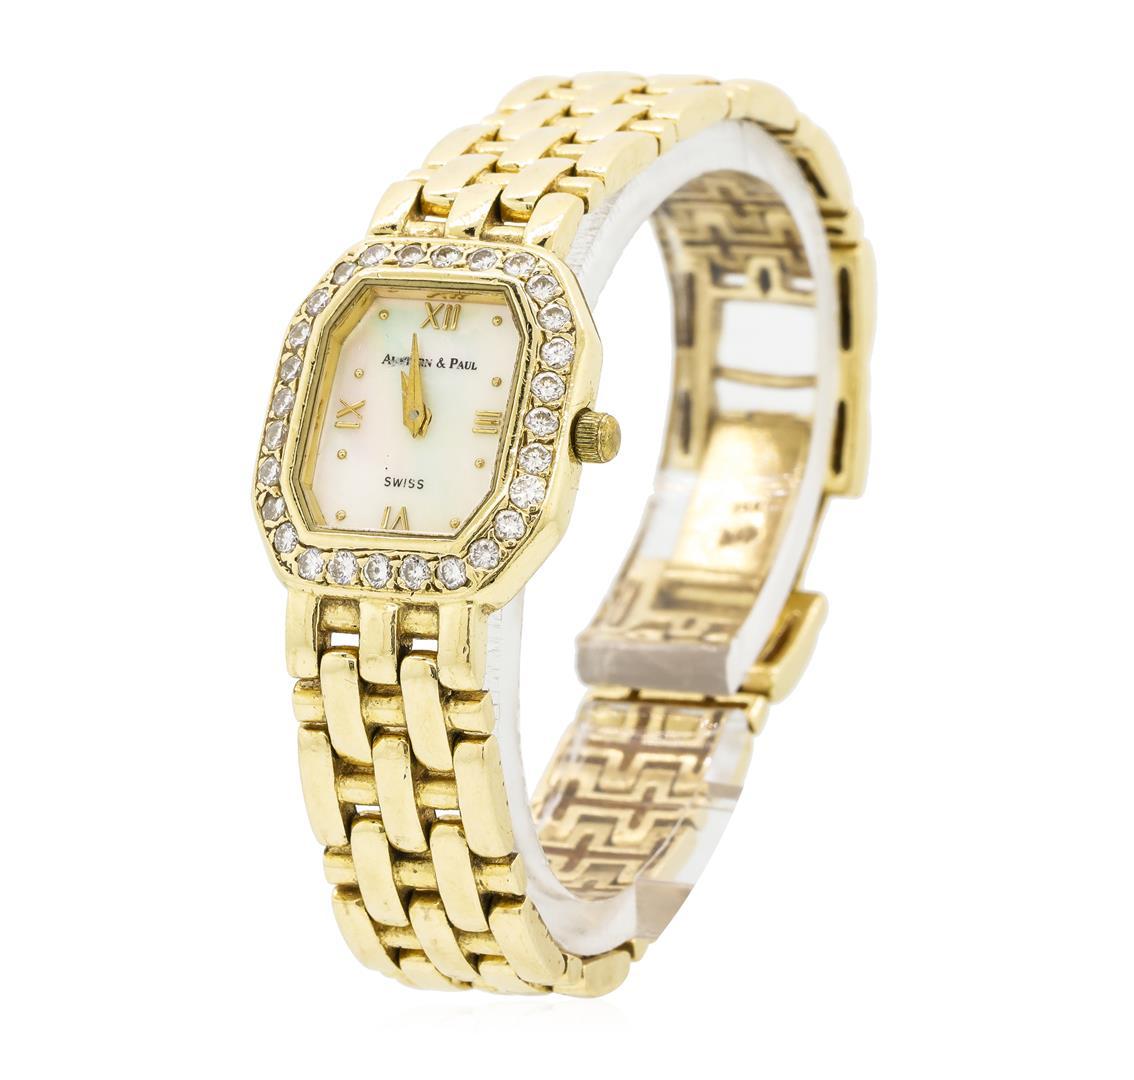 Austern and Paul 14KT Yellow Gold Ladie's Wristwatch